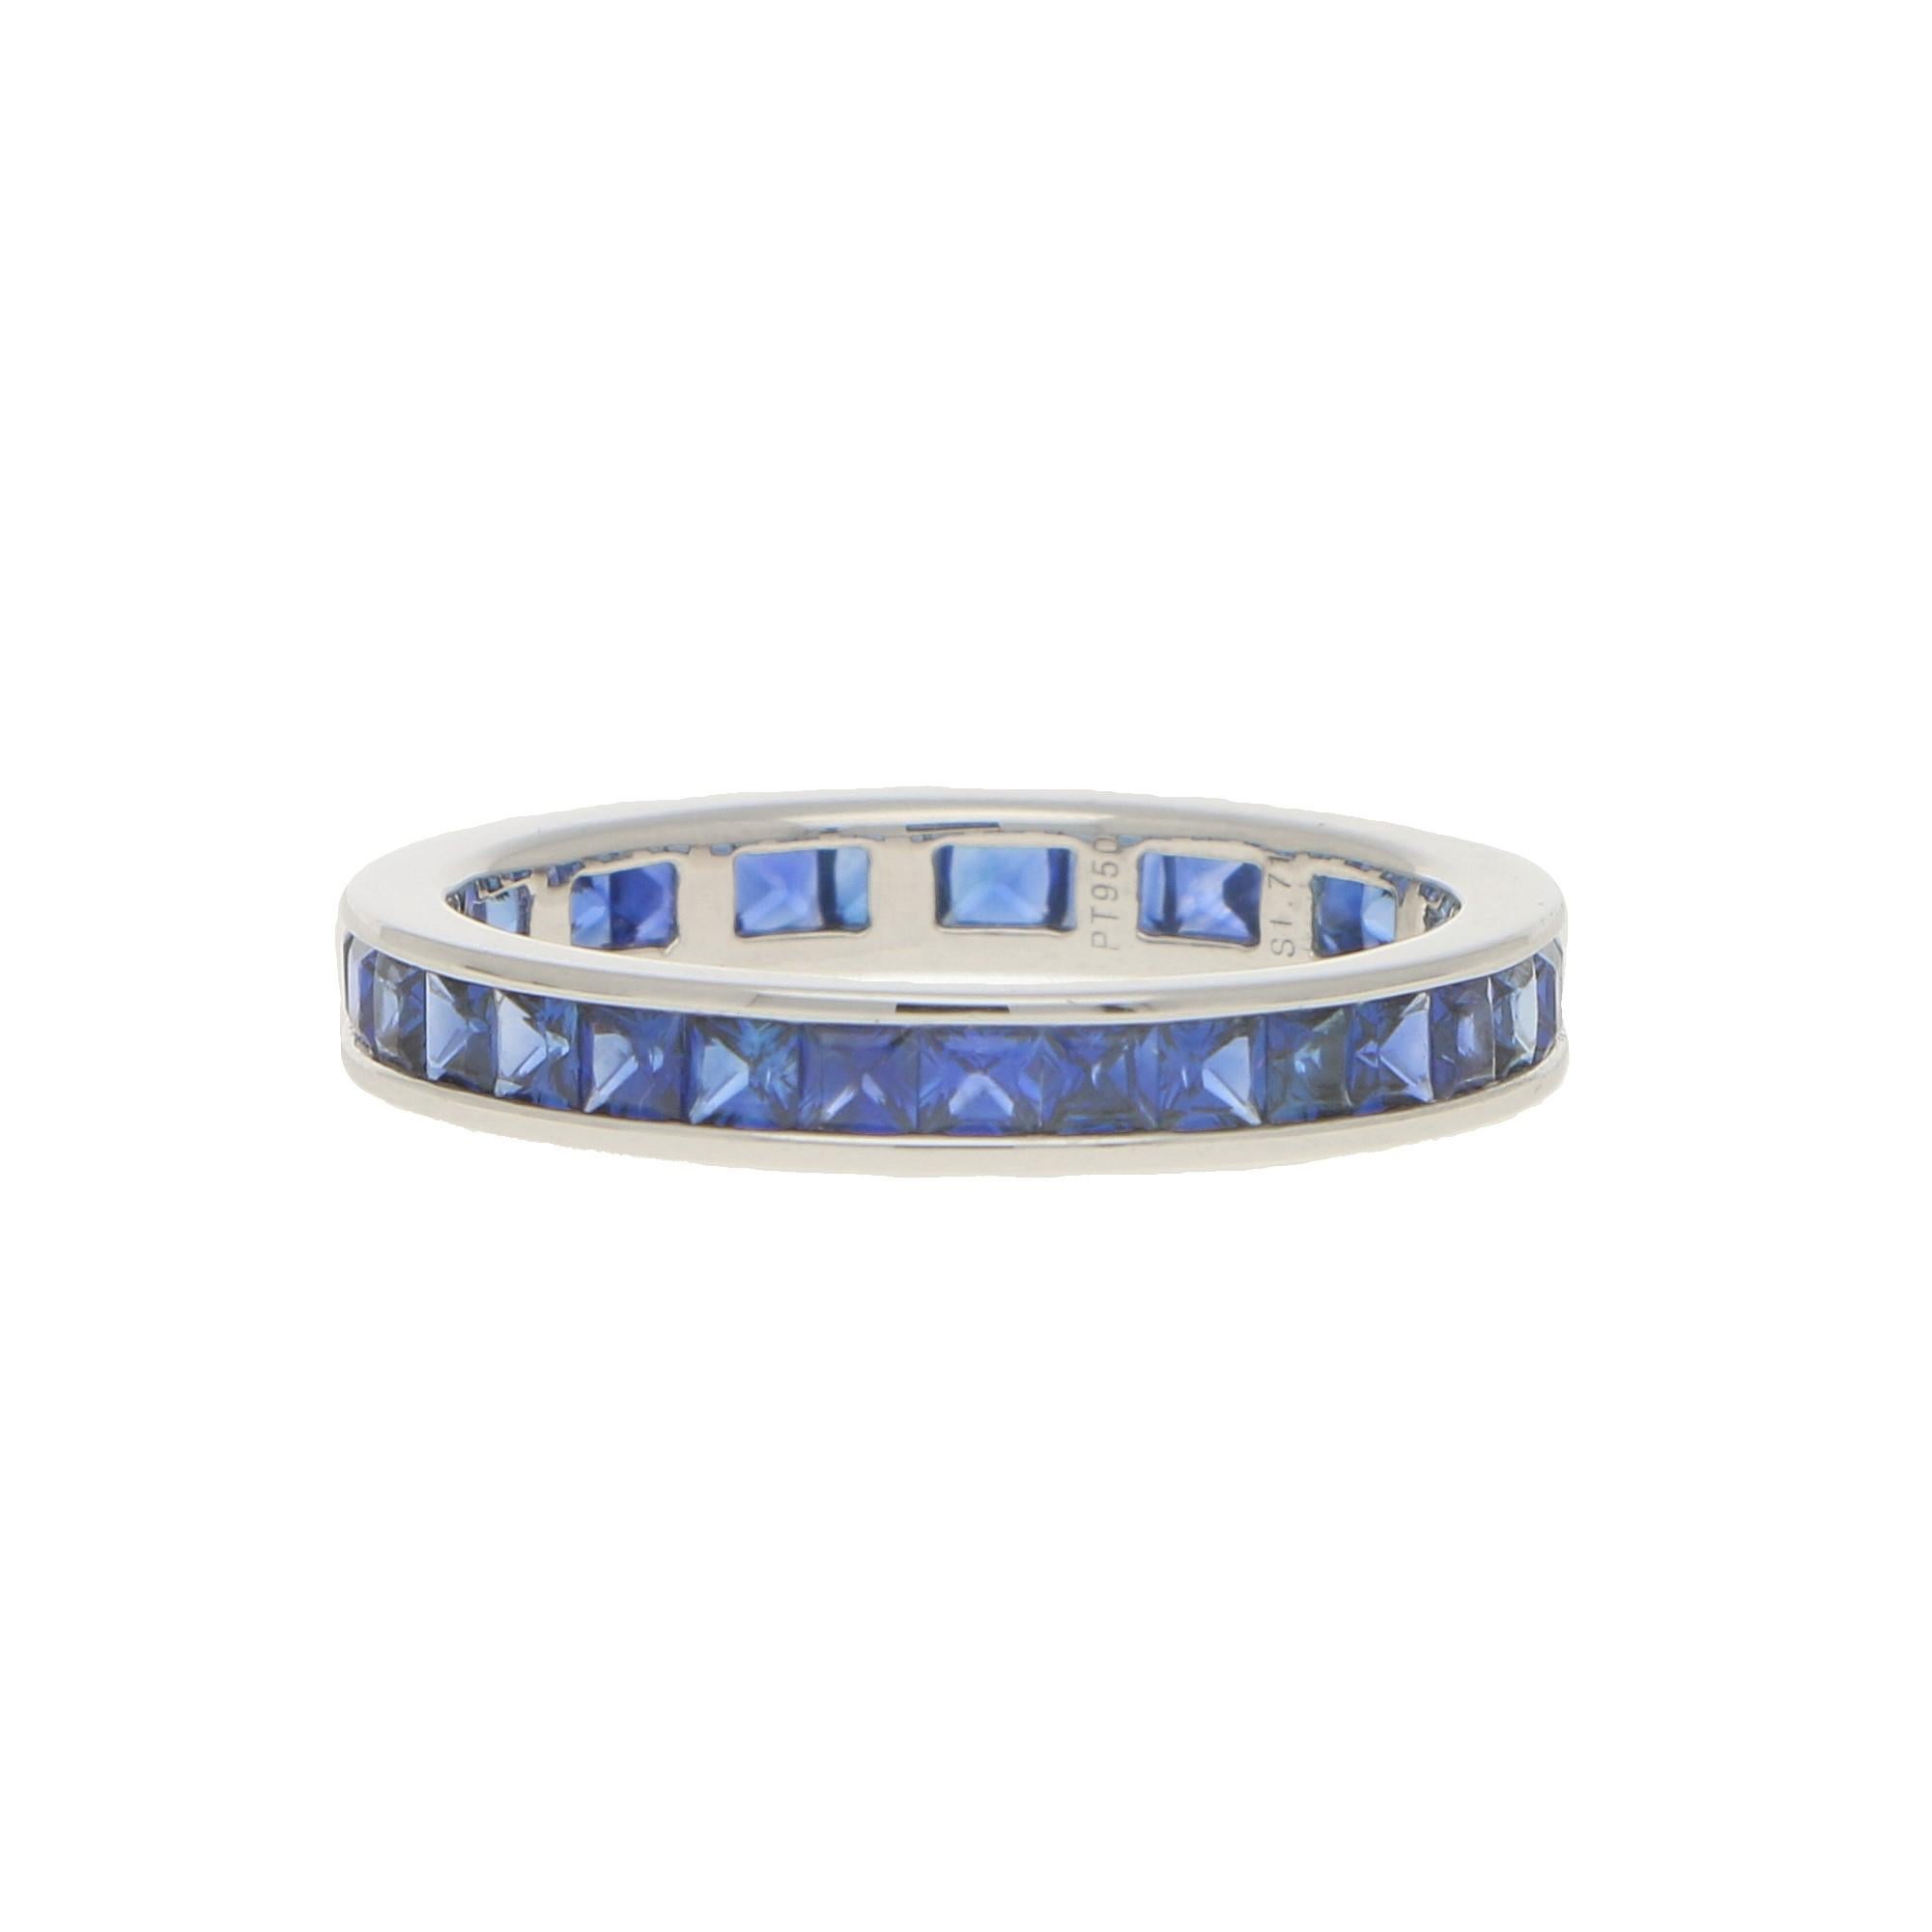 Square Cut Art Deco Inspired Invisibly Set Sapphire Full Eternity Ring Set in Platinum